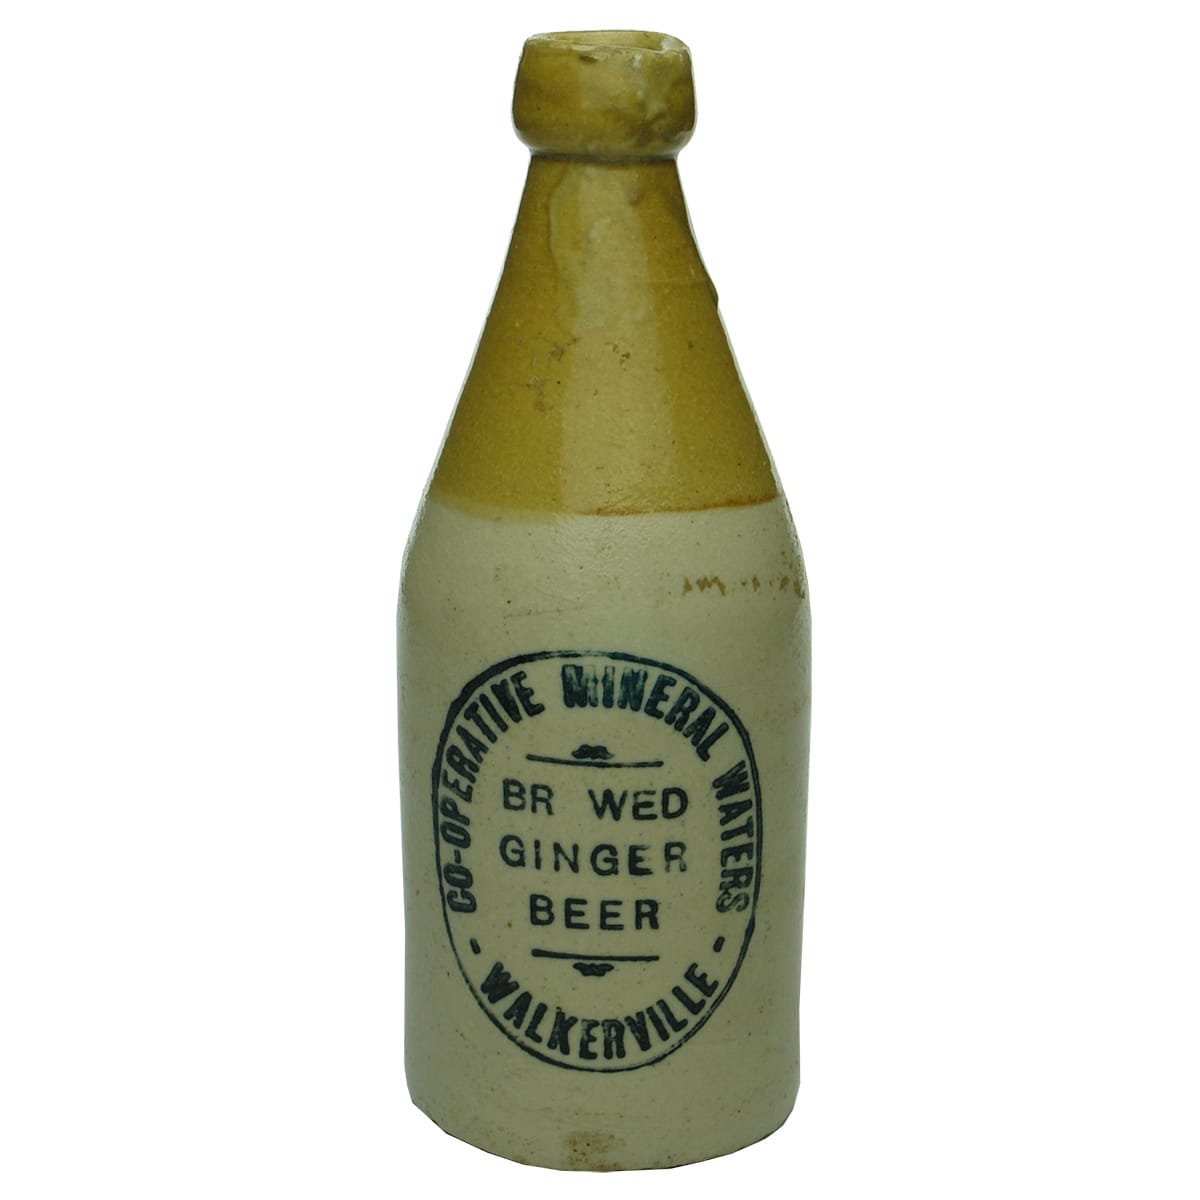 Ginger Beer. Co-Operative Mineral Waters, Walkerville. No E in BREWED. Champagne. Tan Top. (South Australia)